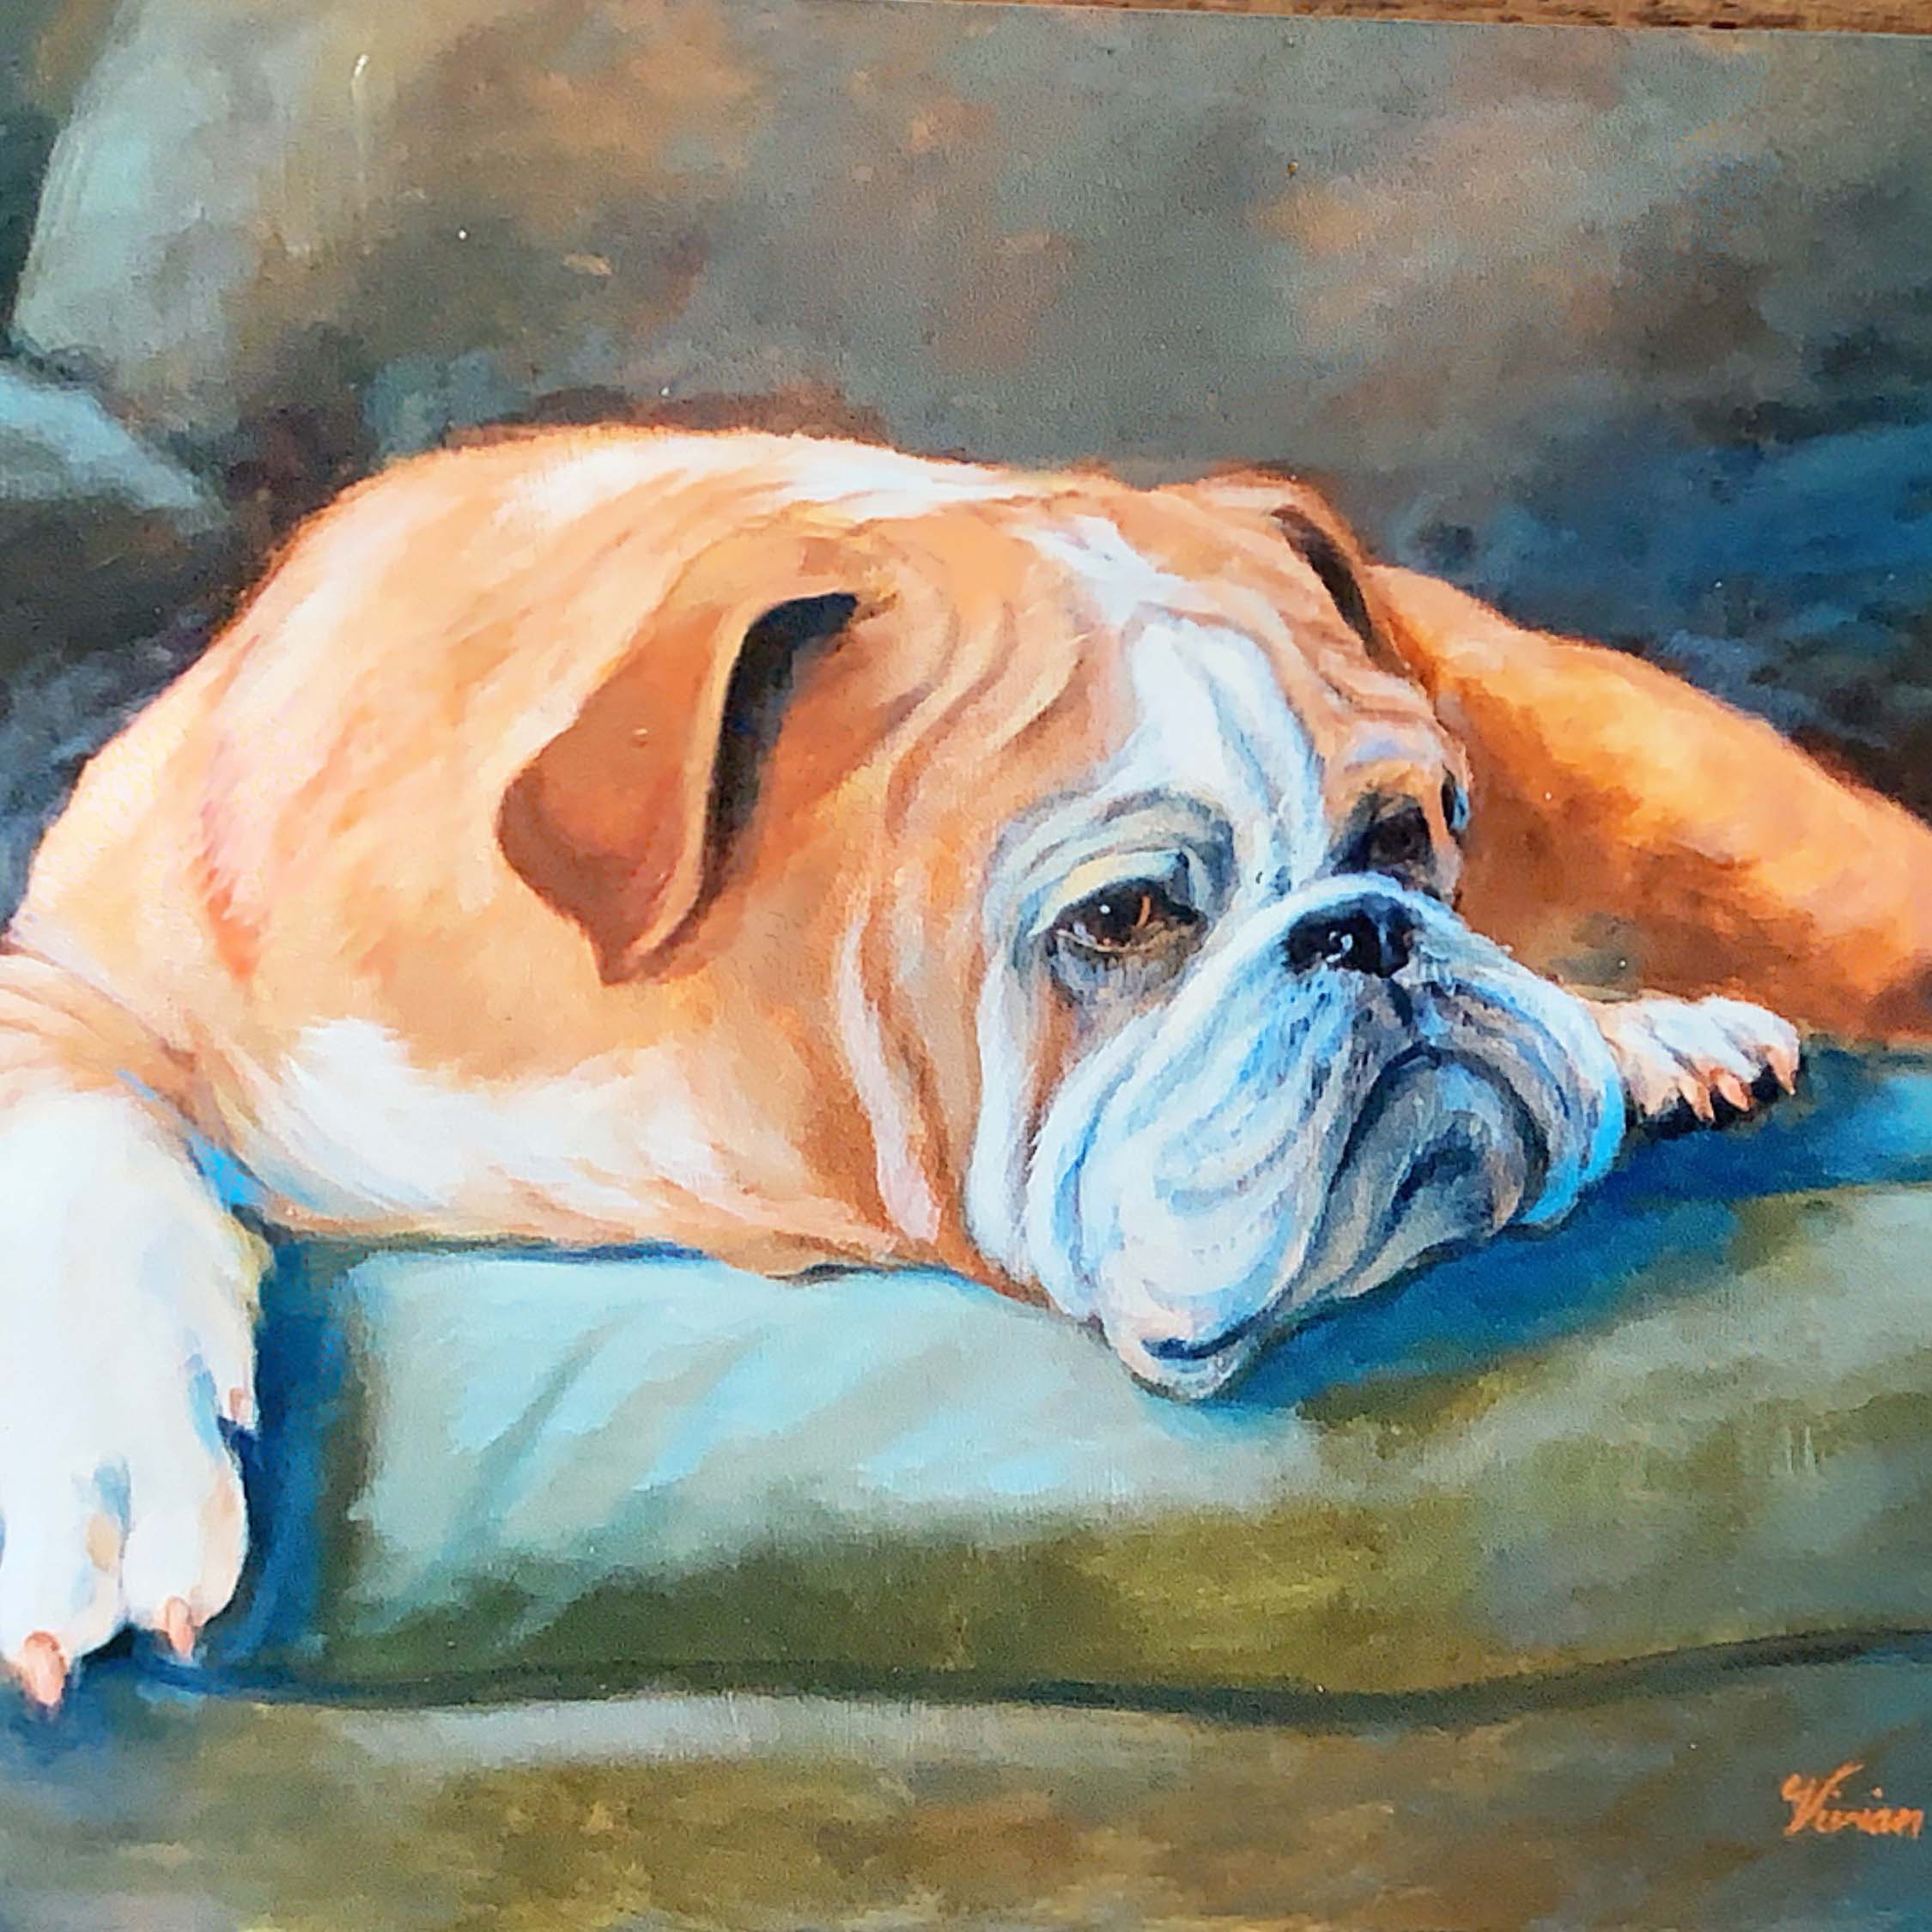 Portrait of a bulldog on a couch.